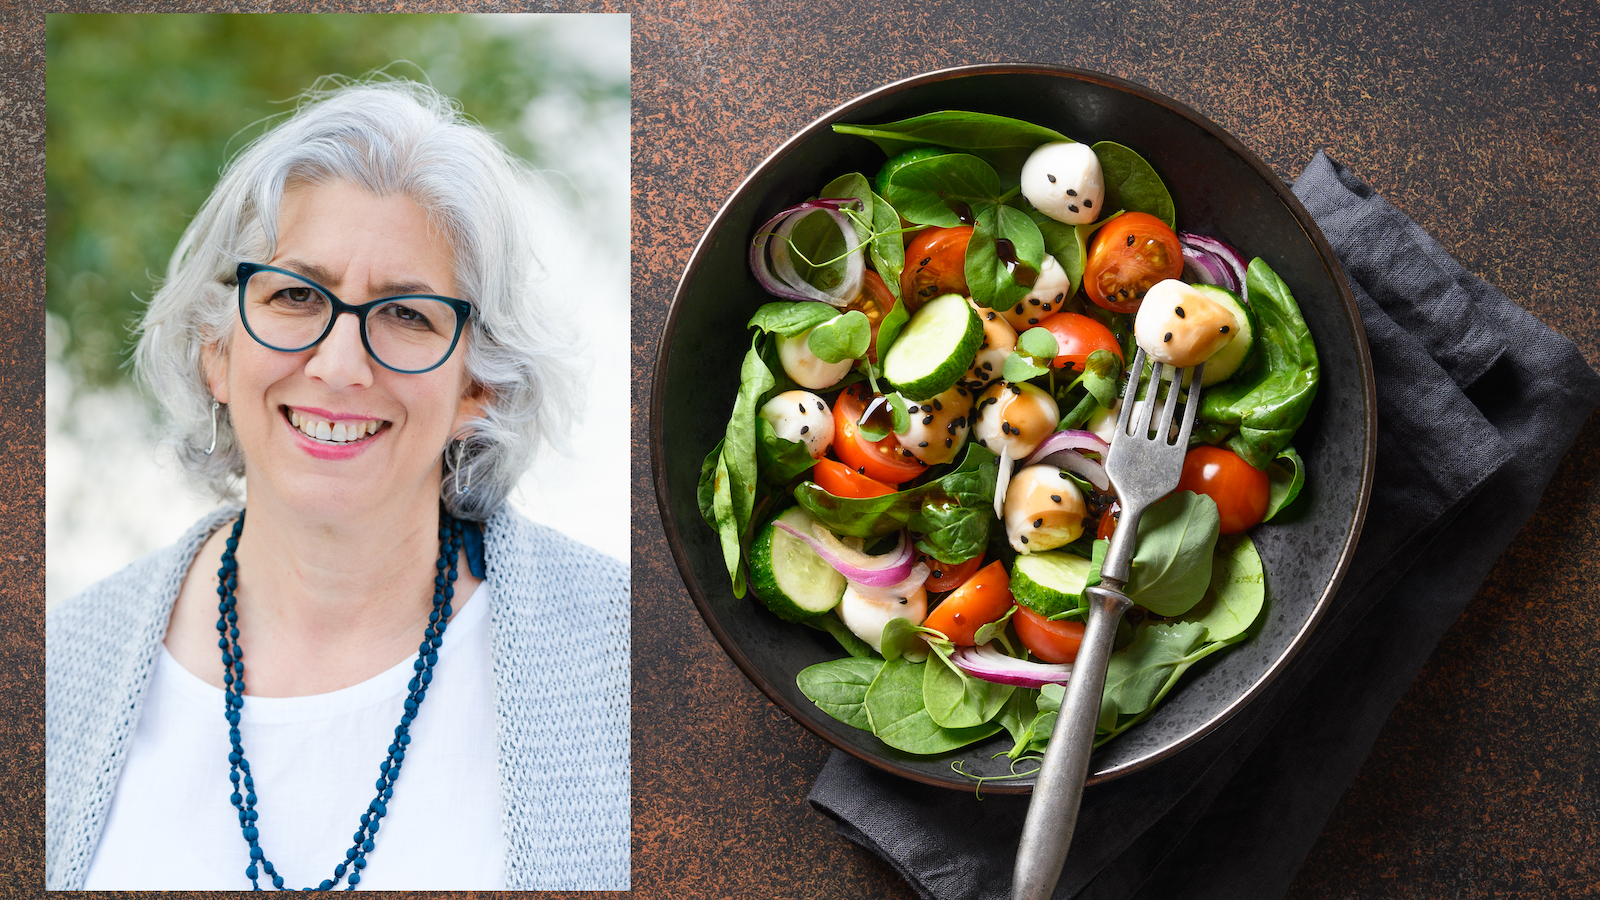 Judy Simon launches new book “Getting to Baby: A Food-First Fertility Plan” with Whole U Q&A